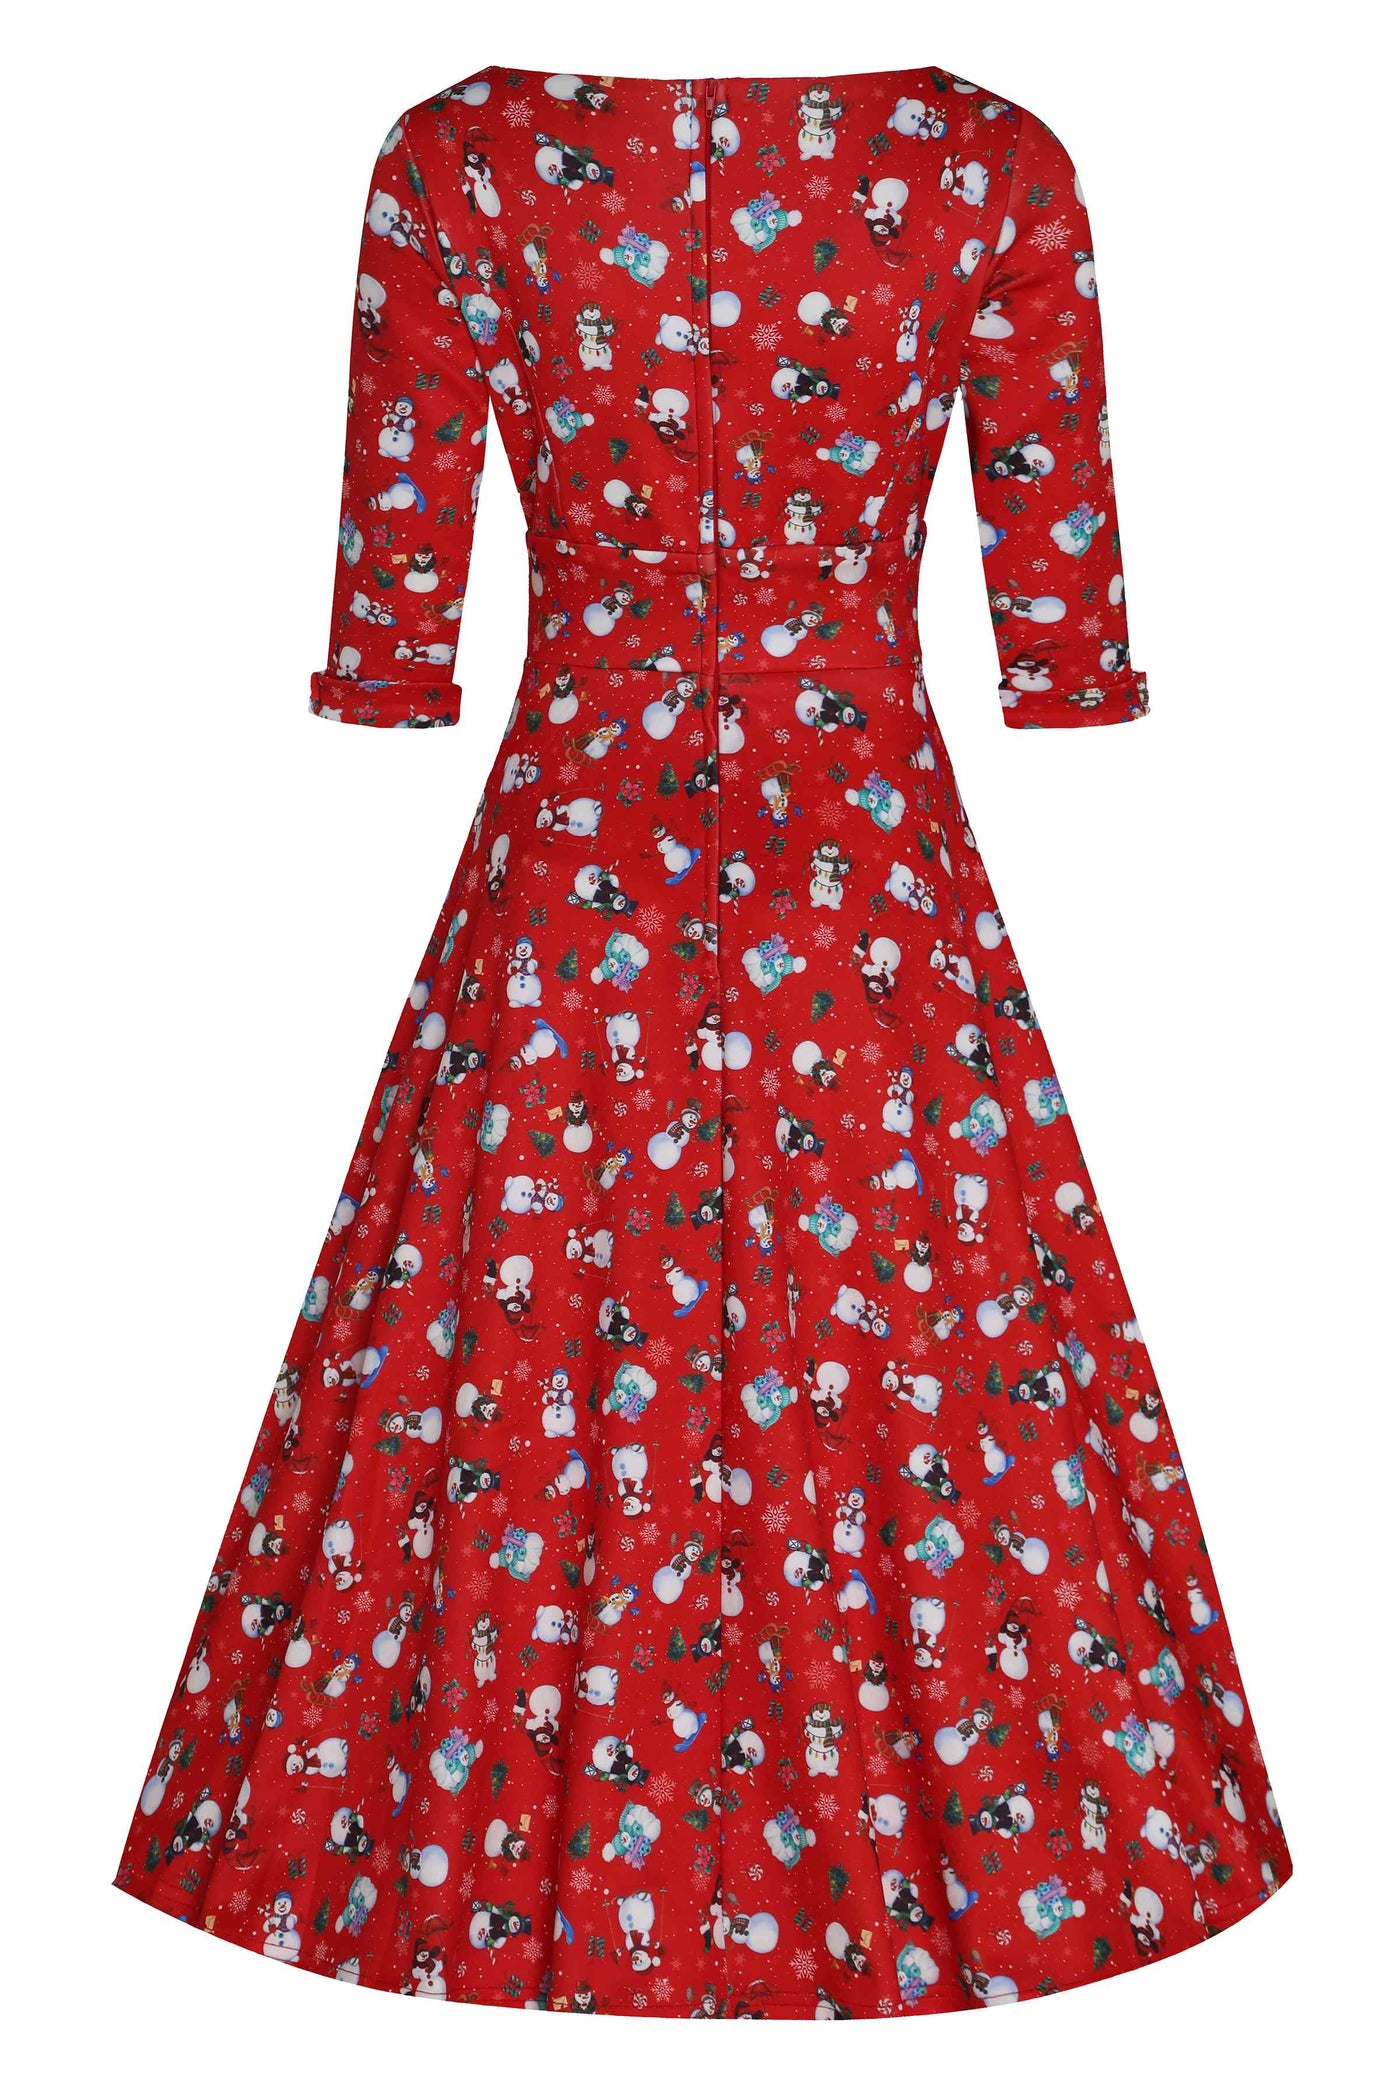 Back view of Snowman print Midi Dress in red